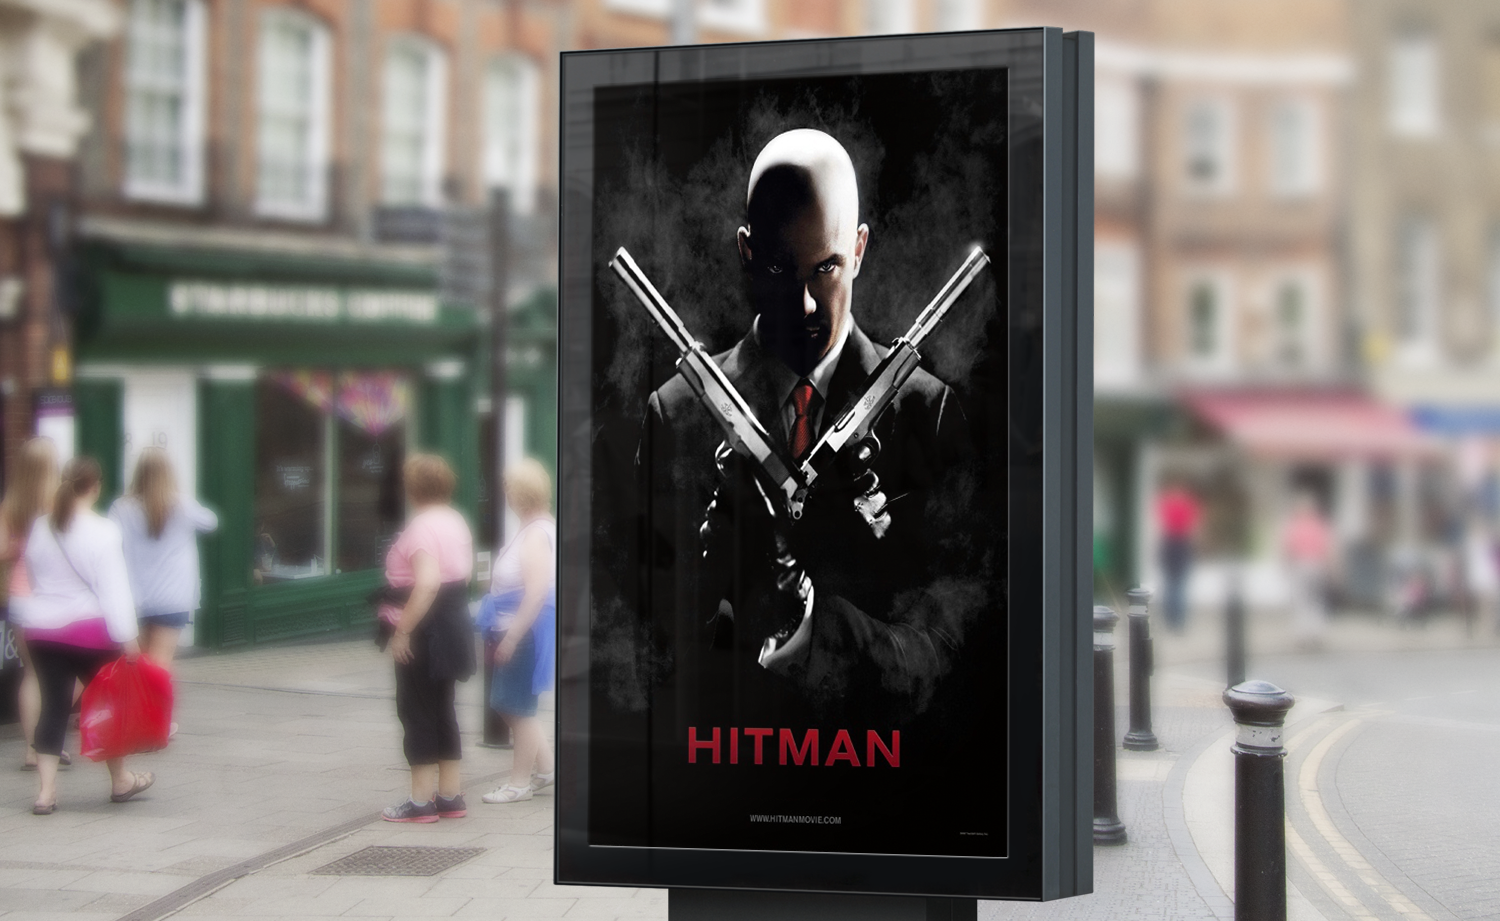 Online PR action for the movie Hitman